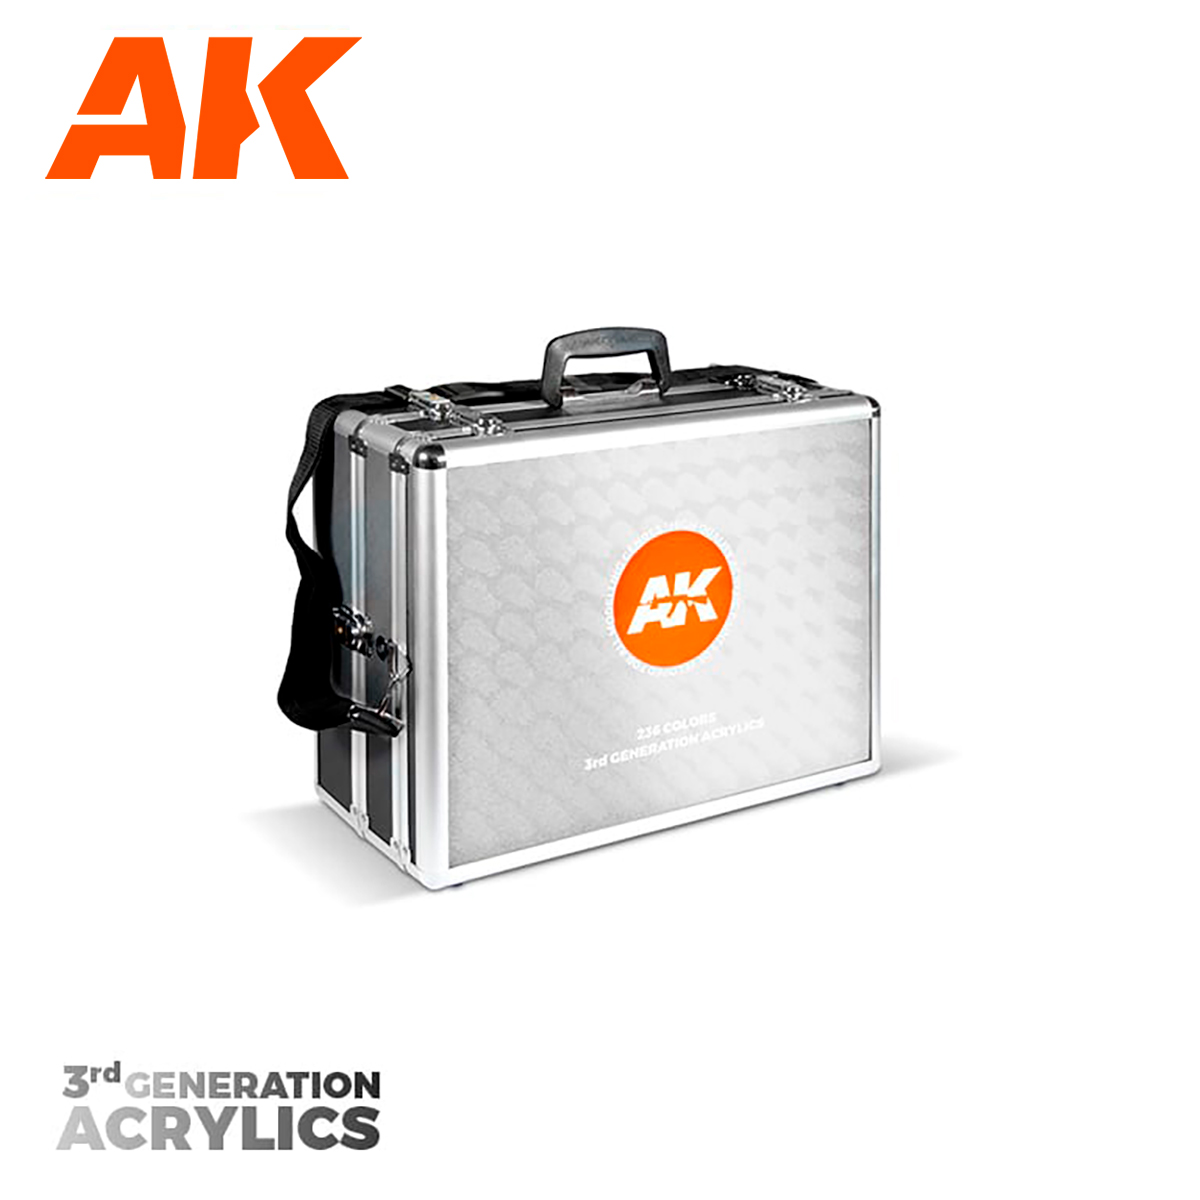 Michigan Toy Soldier Company : AK Interactive - AK Interactive 3G Acrylics  Briefcase - 236 Colors Full Range